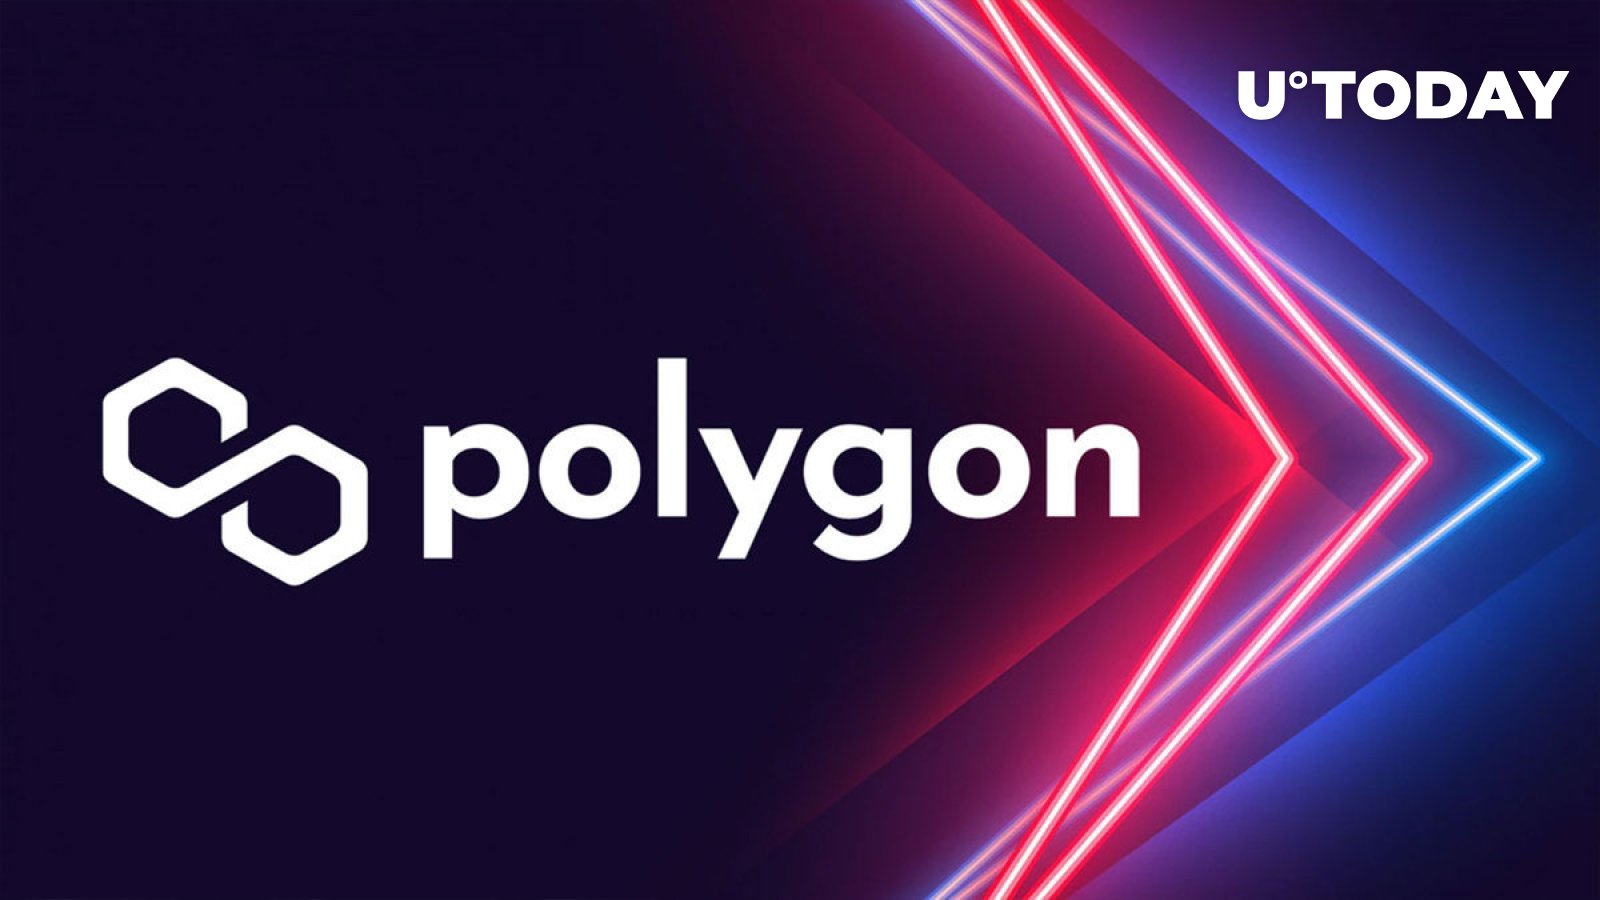 What May Make Polygon Outperform Solana in 2023?